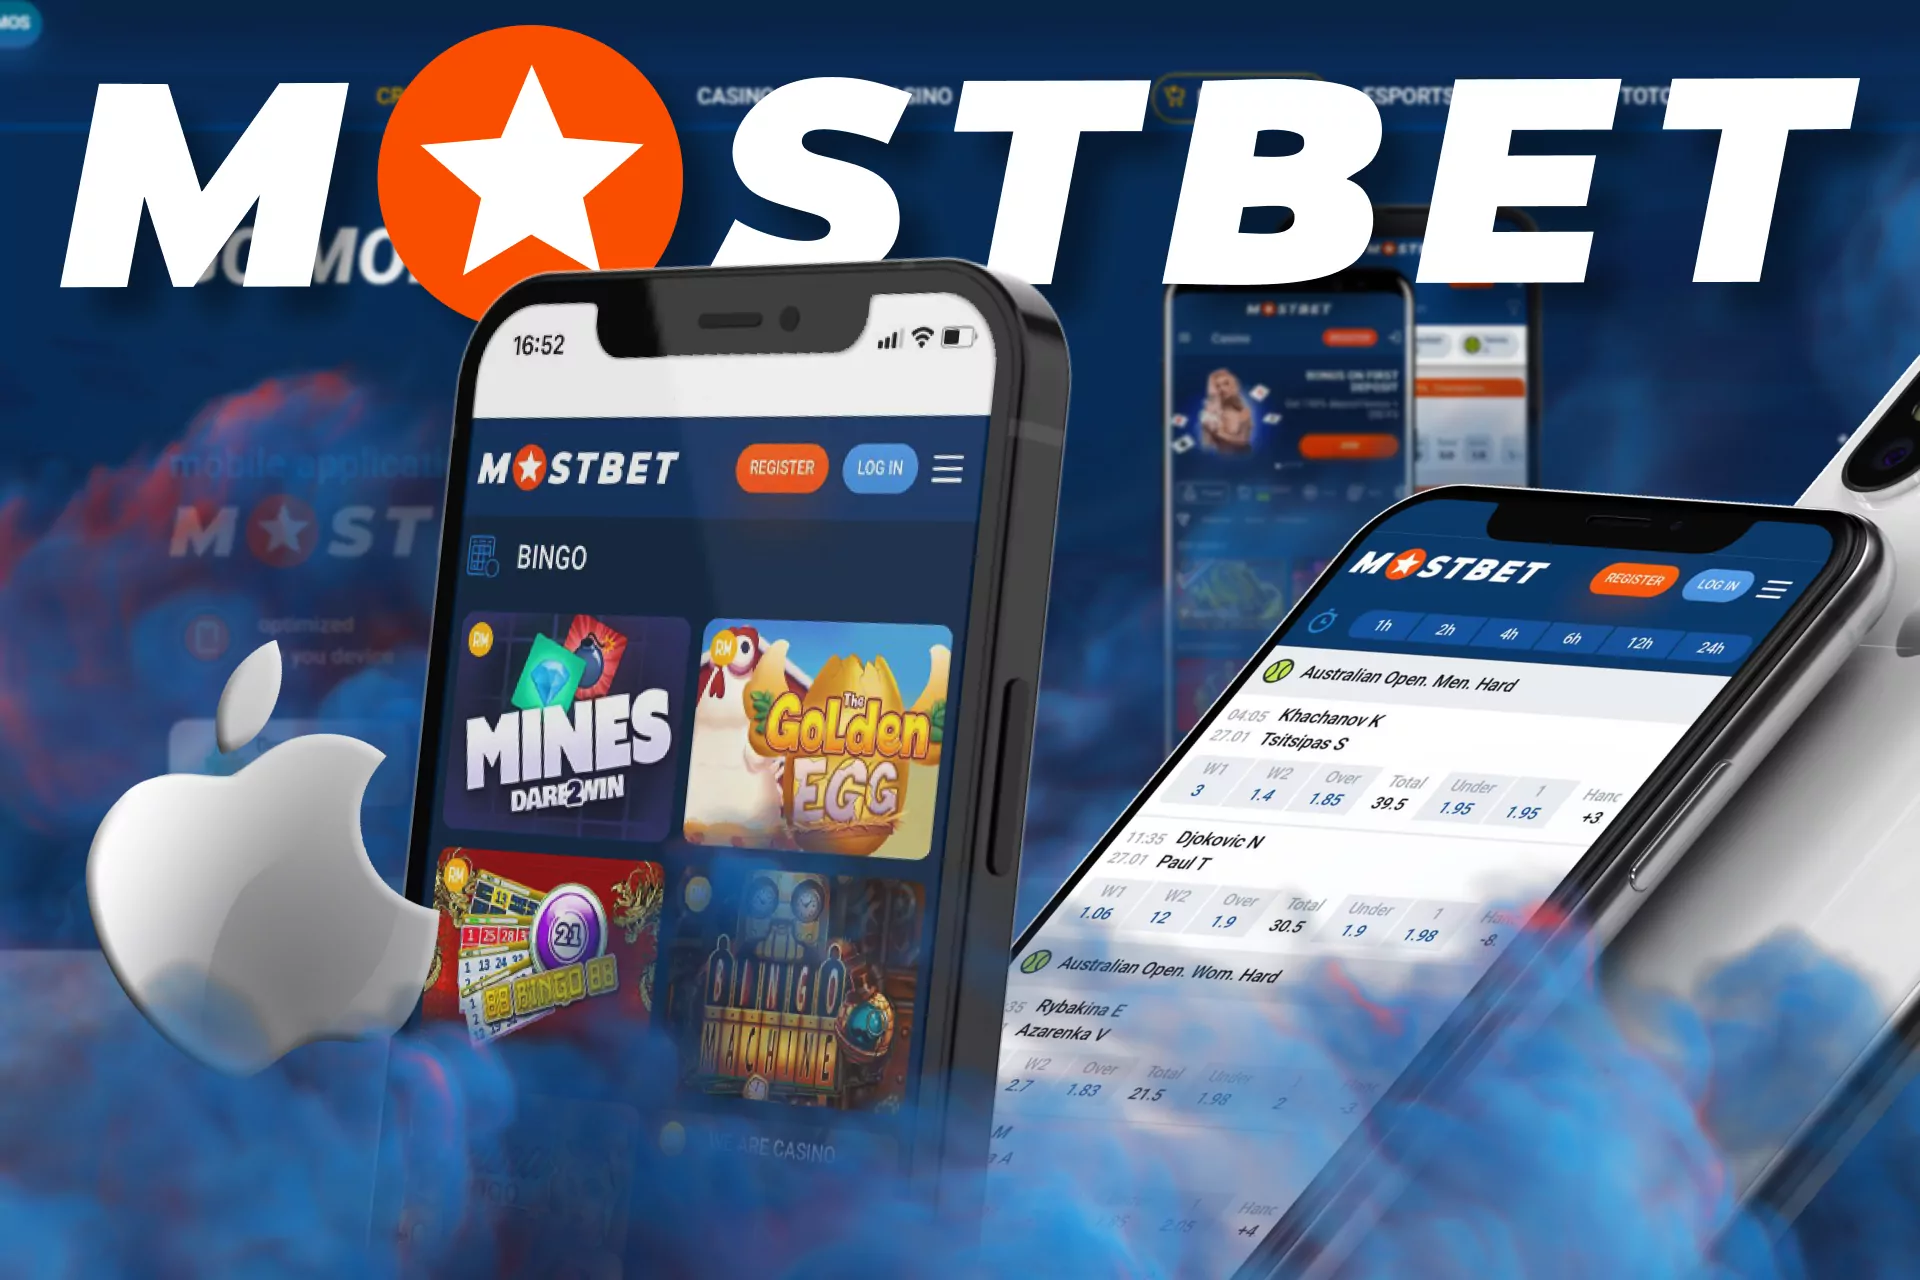 Place bets and play in the Mostbet app directly on your iOS device.